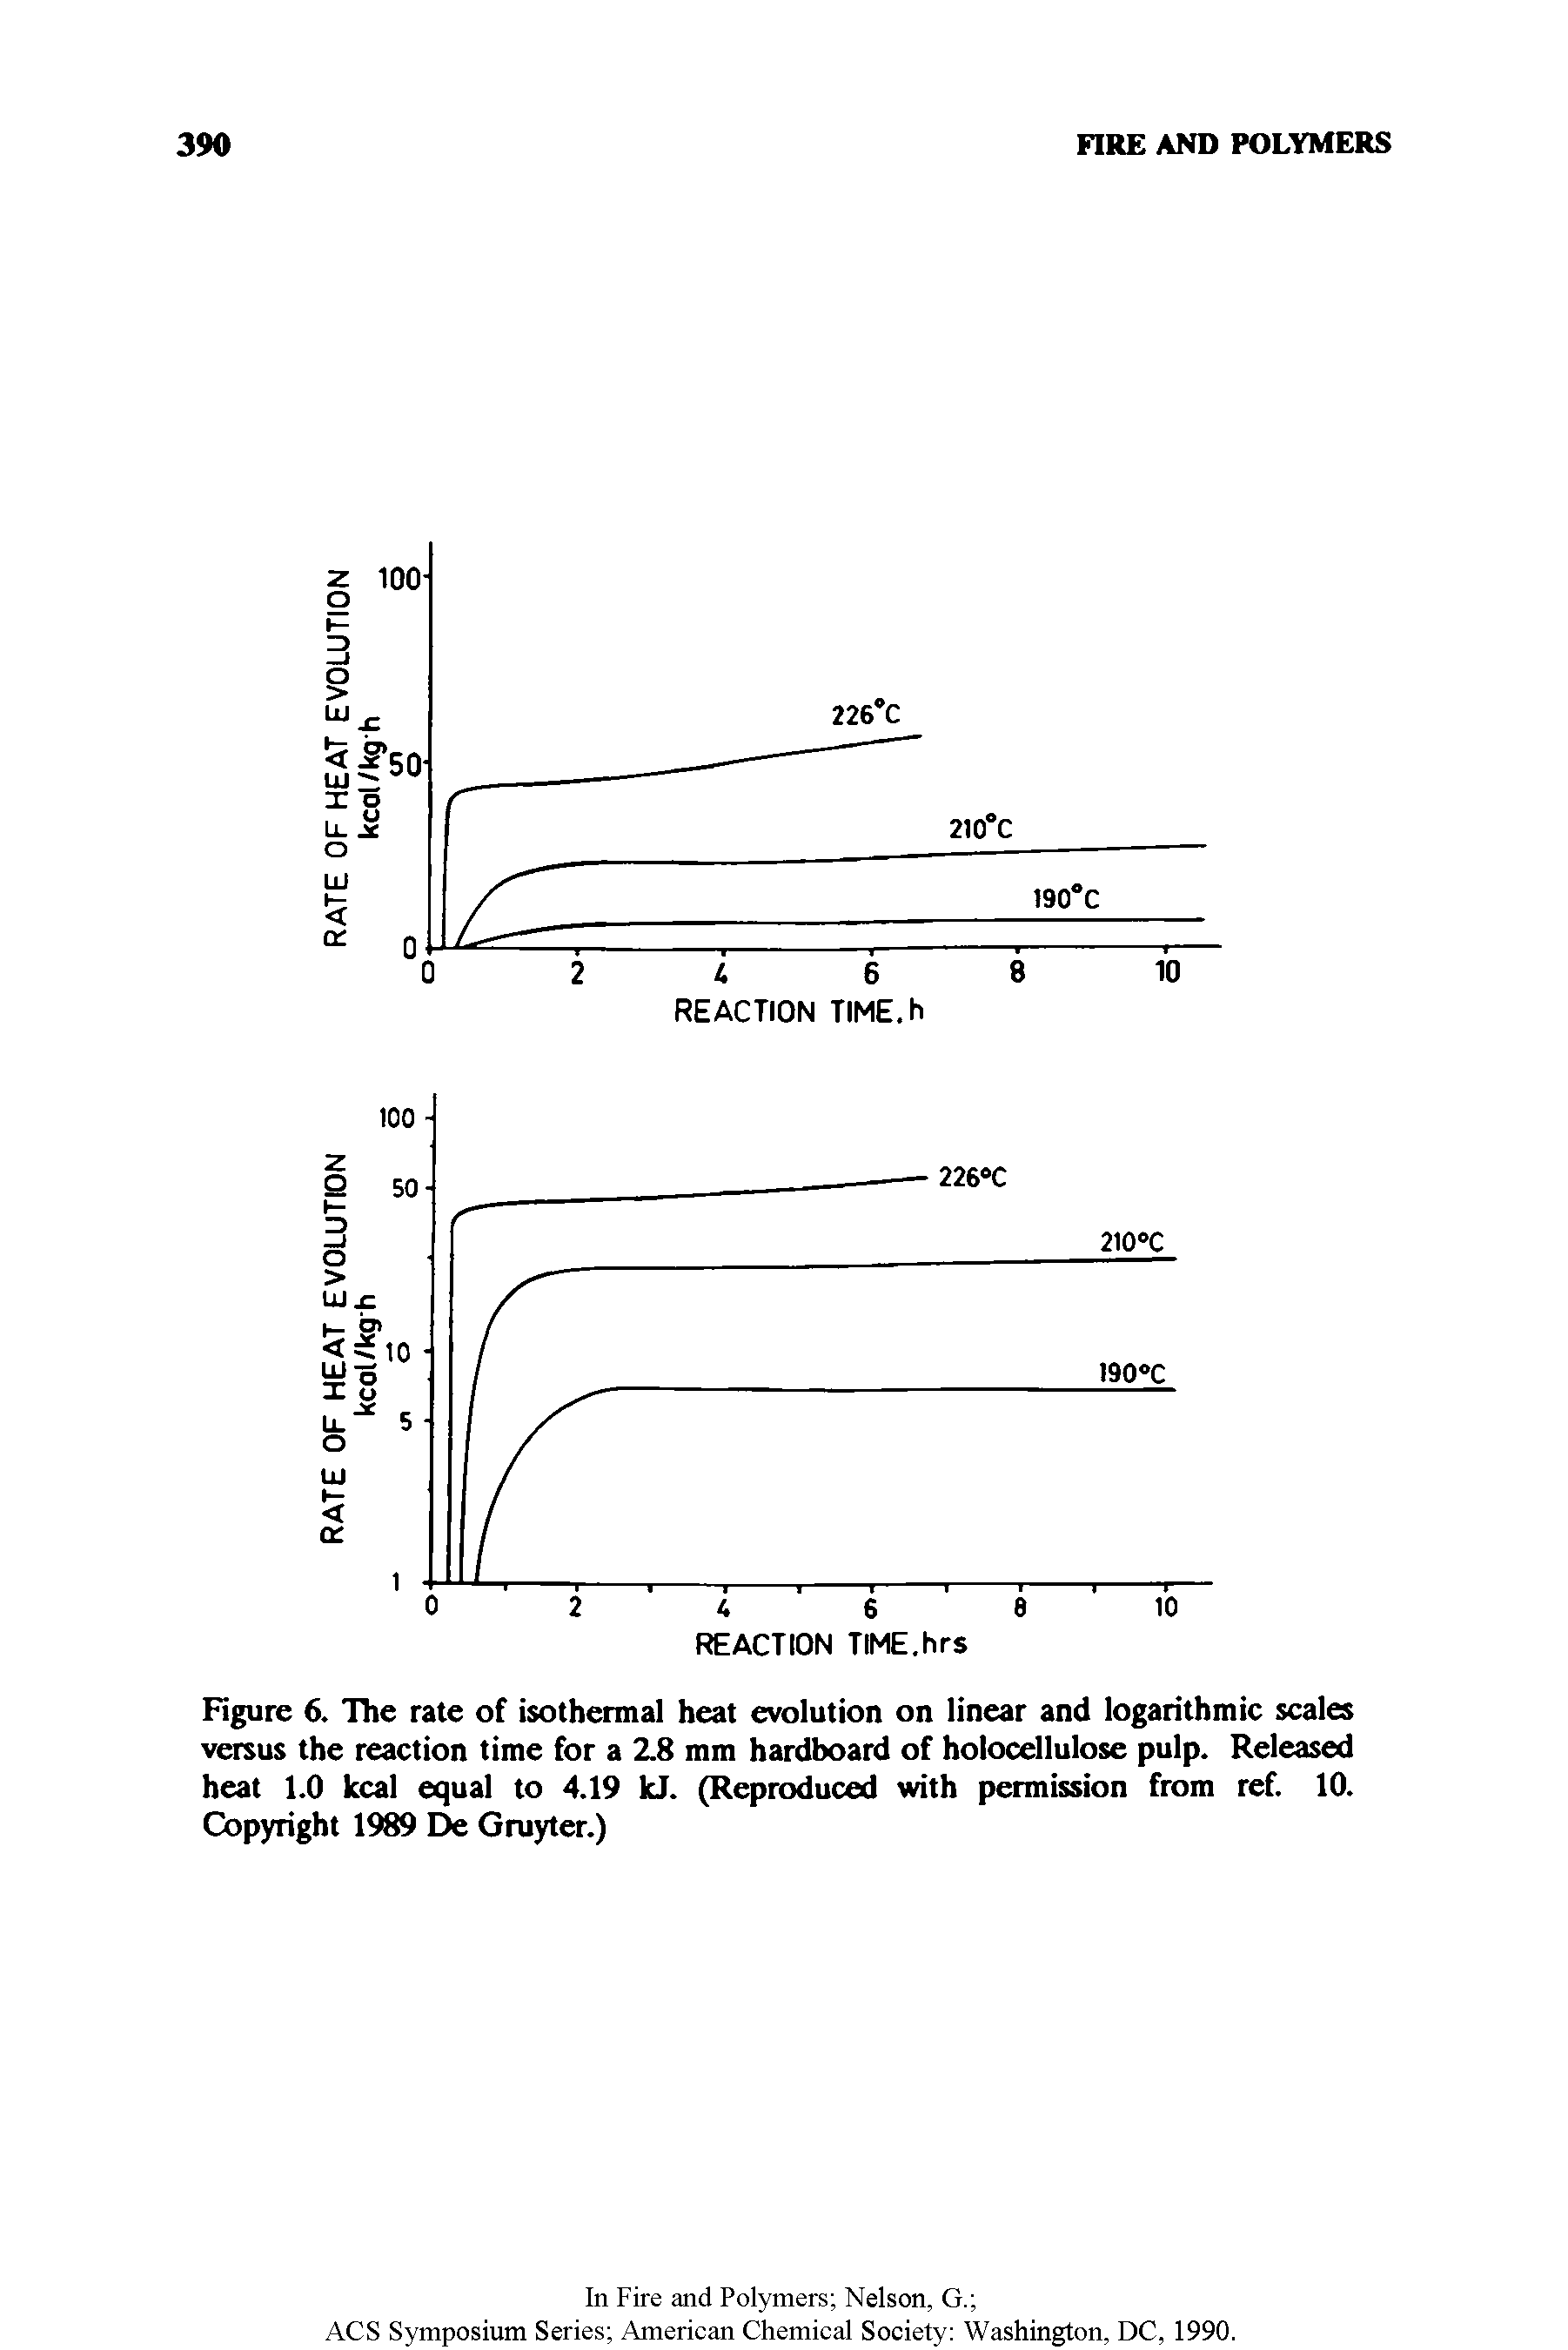 Figure 6. The rate of isothermal heat evolution on linear and logarithmic scales versus the reaction time for a 2.8 mm hardboard of holocellulose pulp. Released heat 1.0 kcal equal to 4.19 kJ. (Reproduced with permission from ref. 10. Copyright 1989 De Gruyter.)...